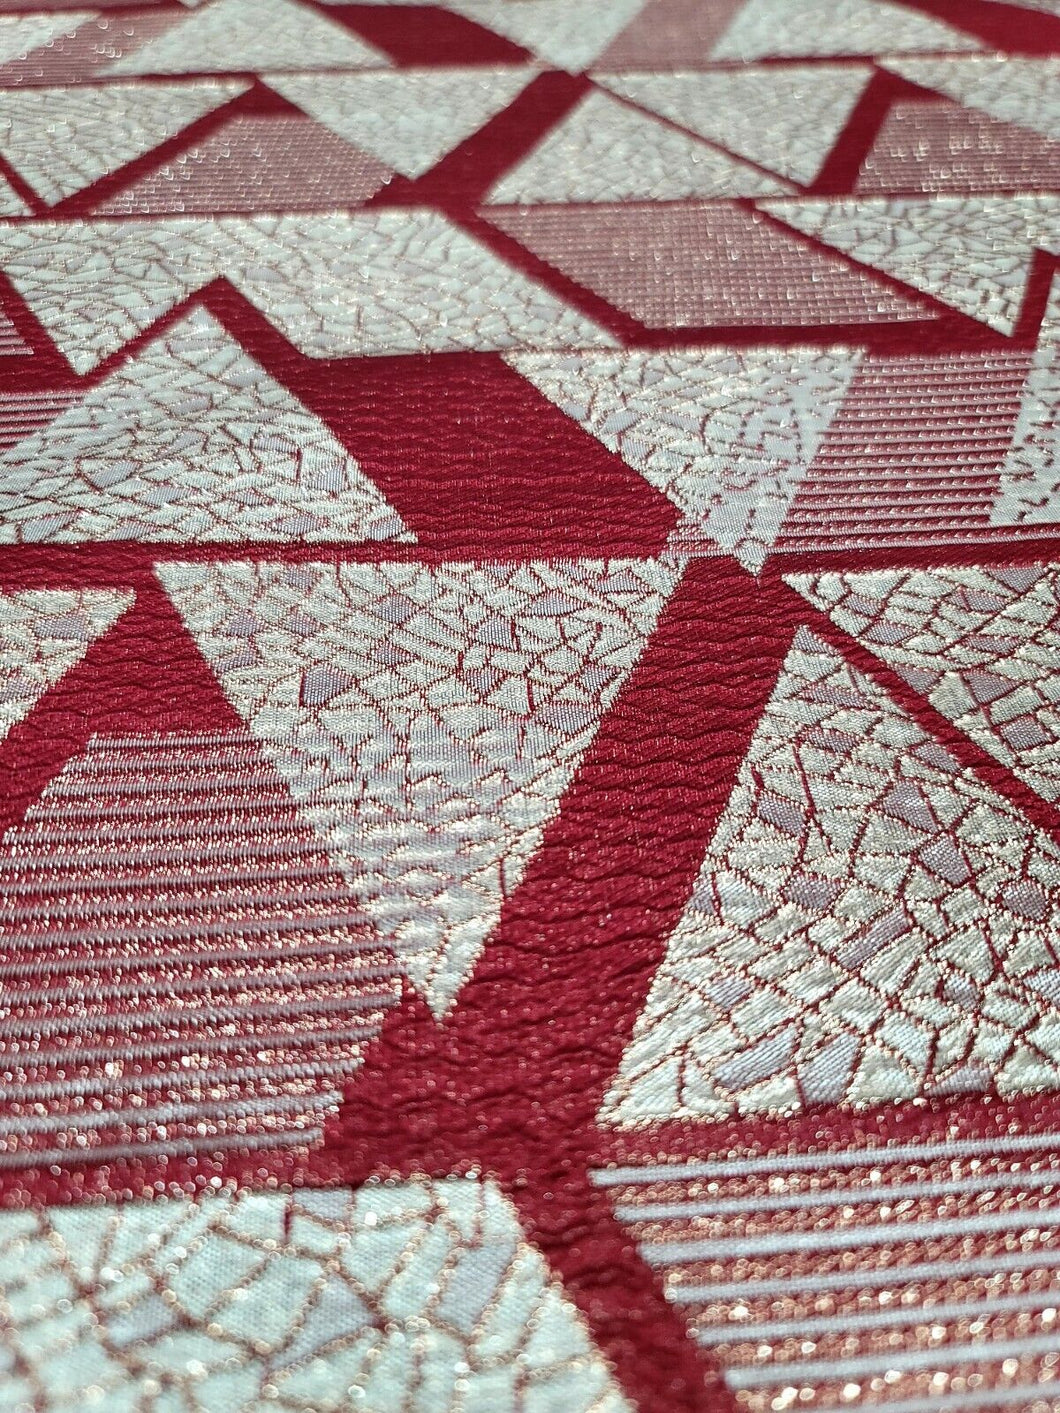 RED BROCADE JACQUARD FABRIC SOLD BY YARD HOME DECORATION DRESS ART DECO TRIANGLE